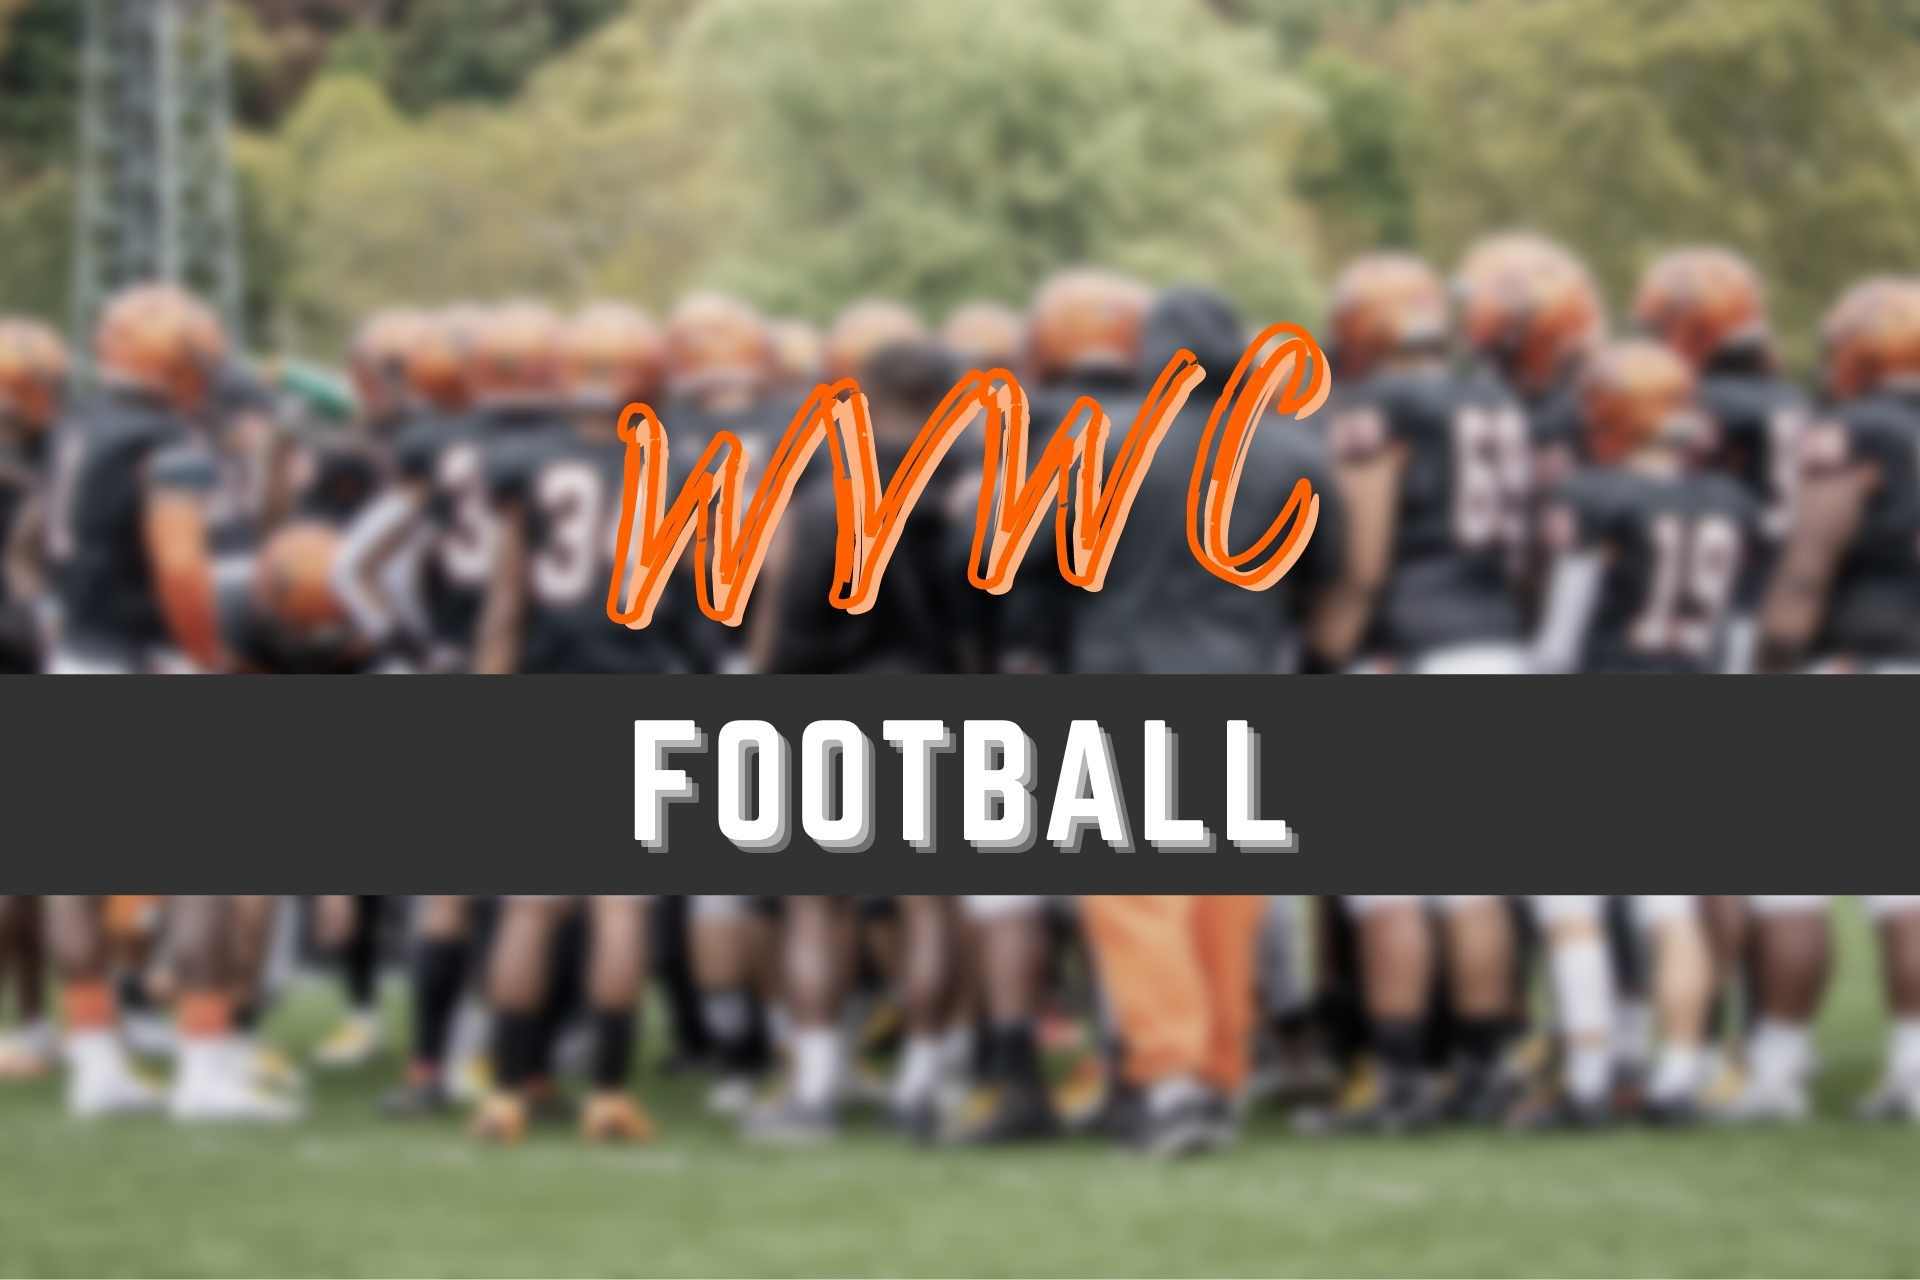 WVWC Football Feature Image